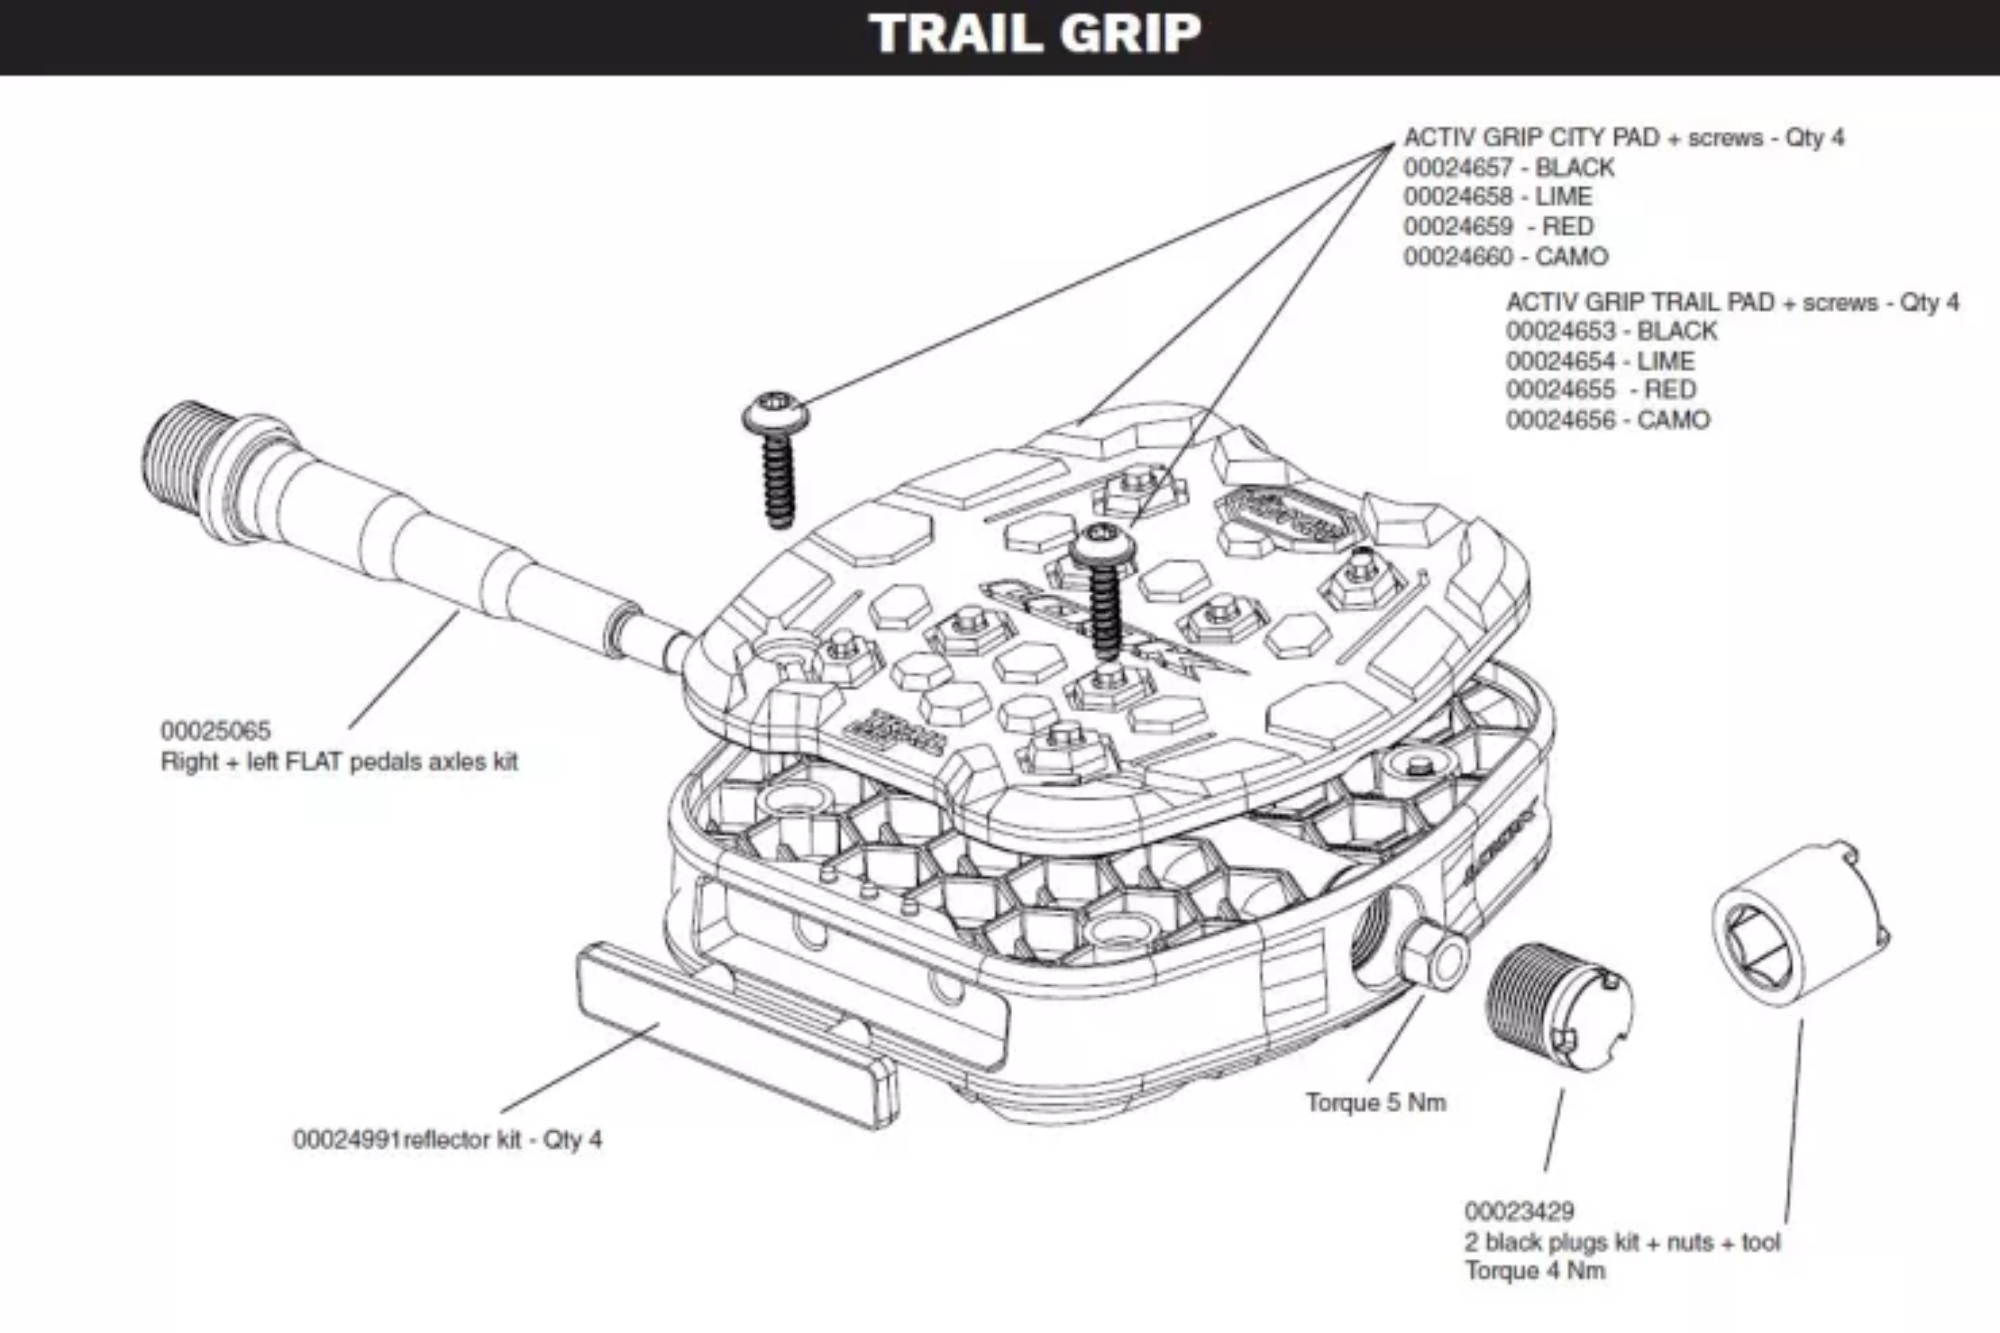 Image shows the composition of the Look Trail Grip flat pedals.